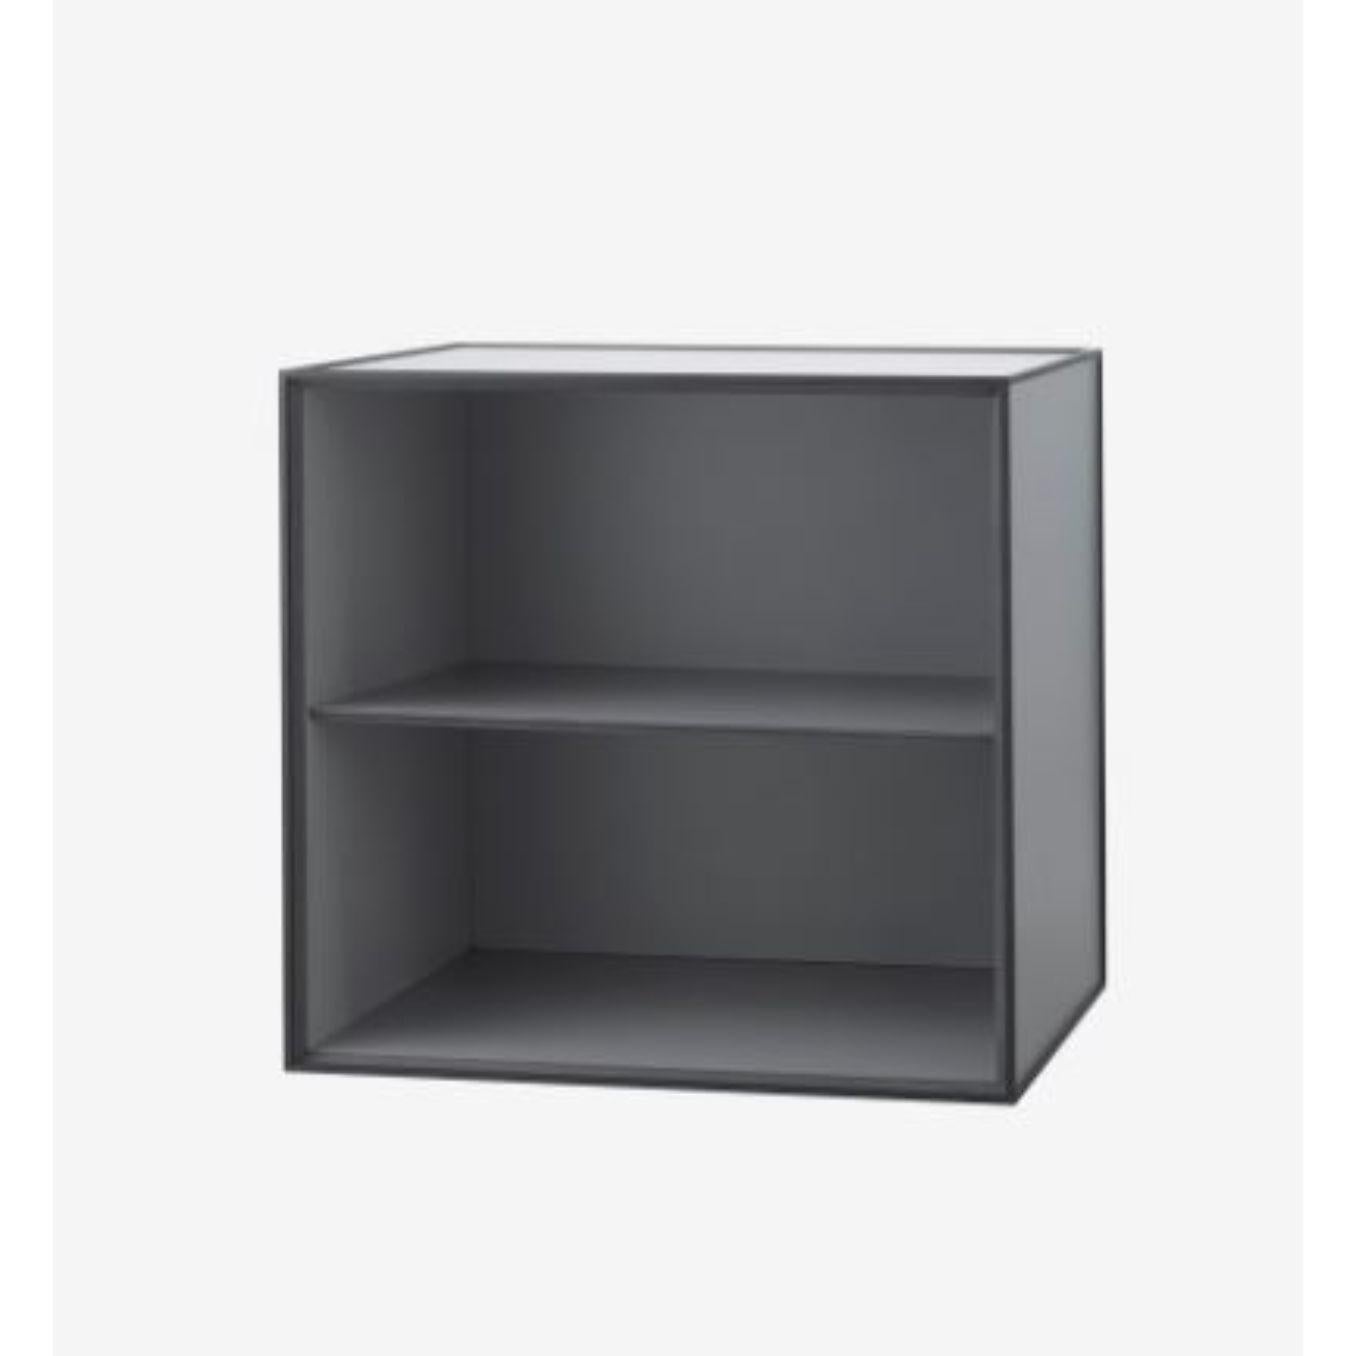 49 dark grey frame box with shelf by Lassen
Dimensions: D 49 x W 42 x H 49 cm 
Materials: Finér, Melamin, Melamin, Melamine, Metal, Veneer, Ash
Also available in different colours and dimensions. 
Weight: 14 Kg


By Lassen is a Danish design